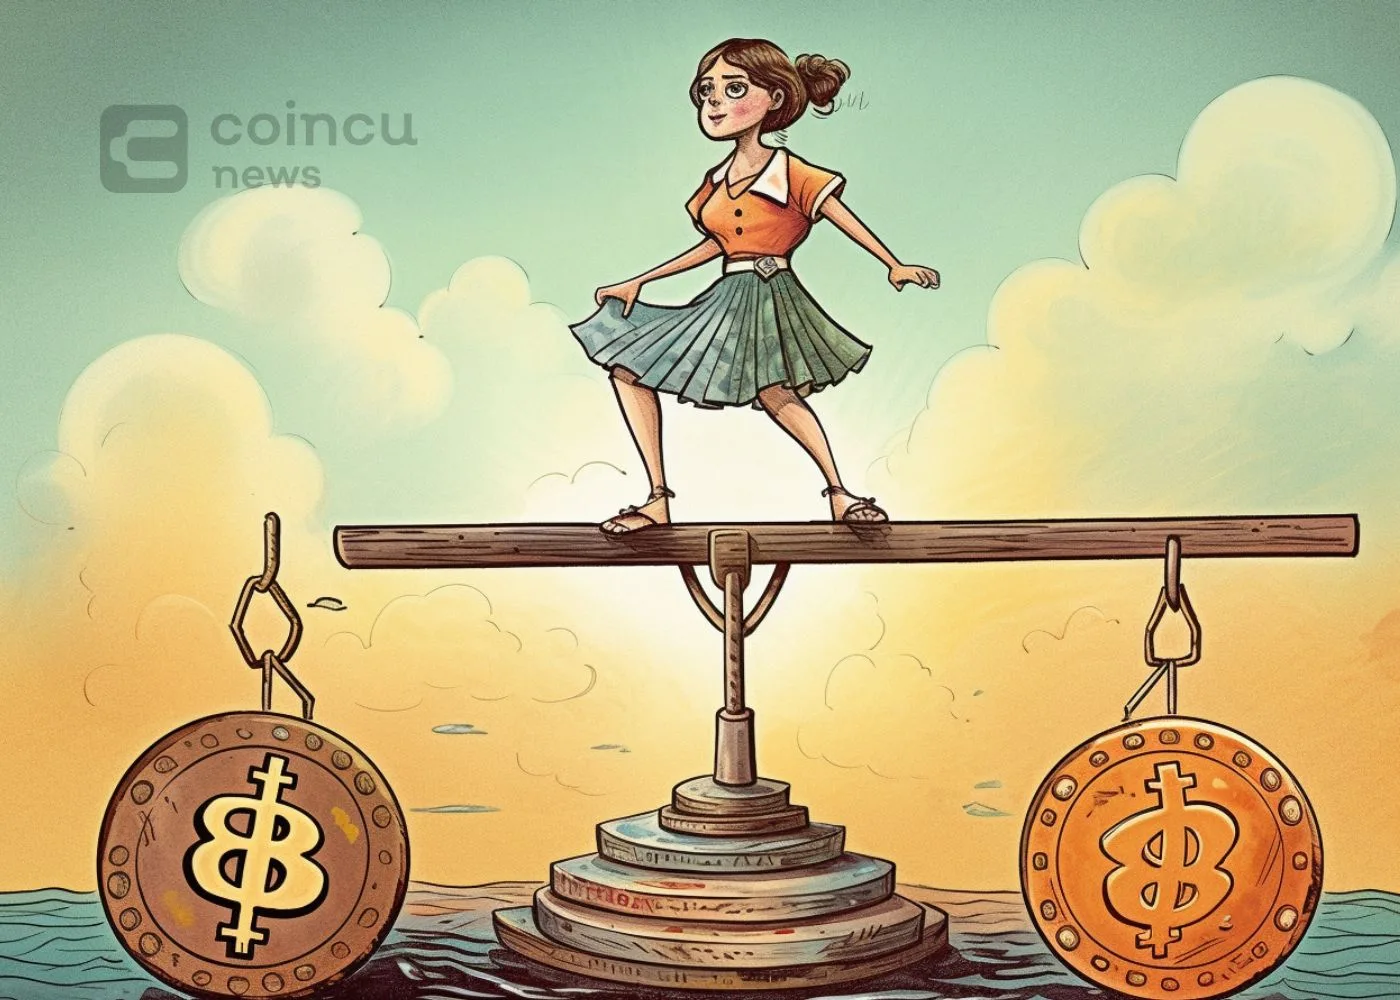 Cathie Wood Bets On Bitcoin As The Strong Hedge Against Deflation